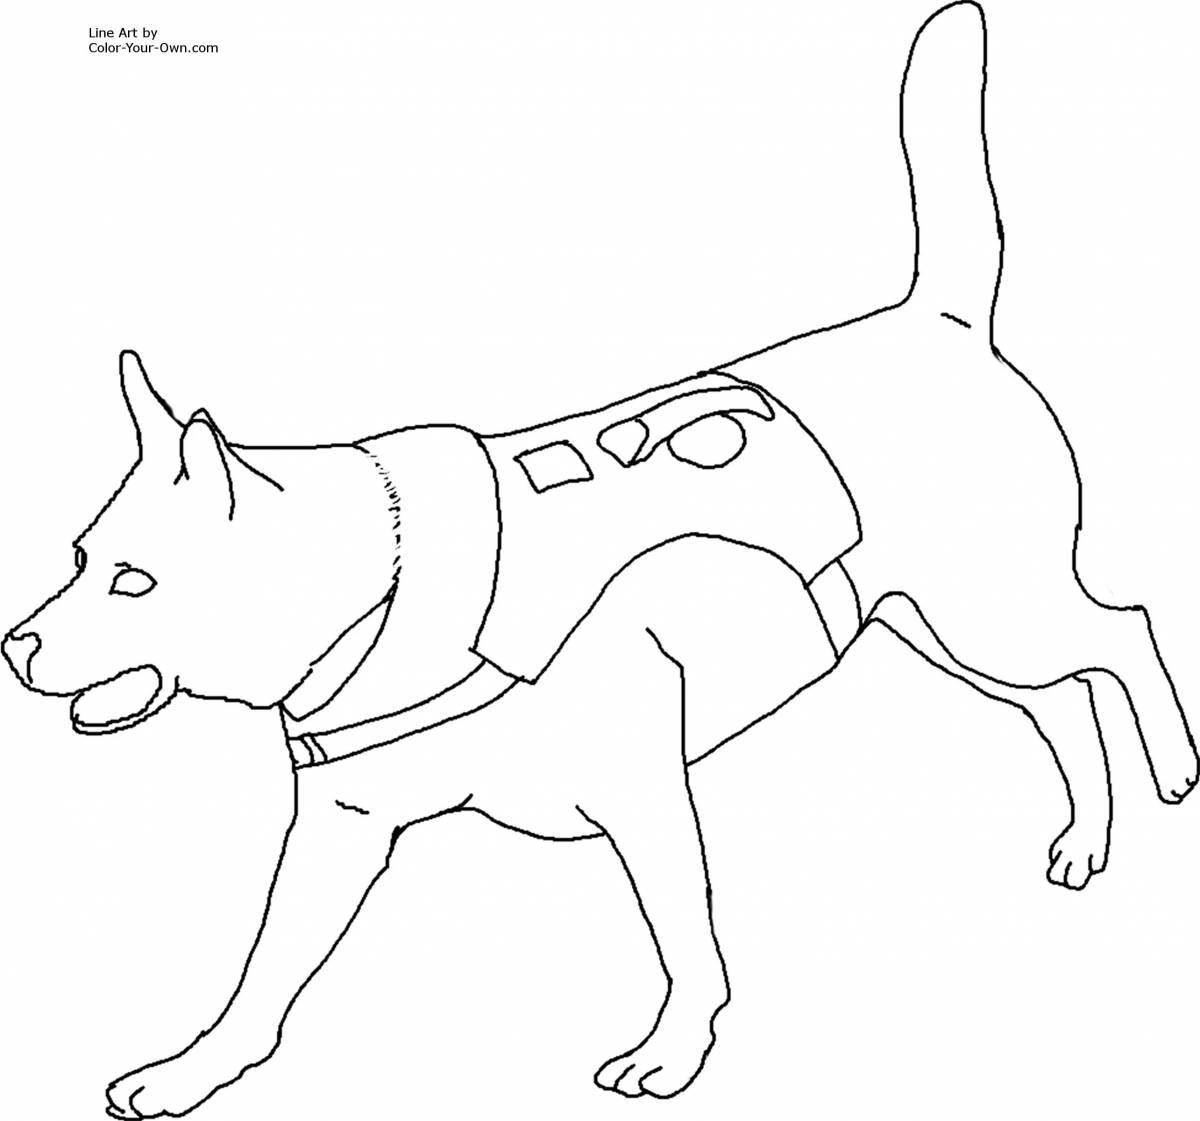 Coloring pages nice service dogs for kids